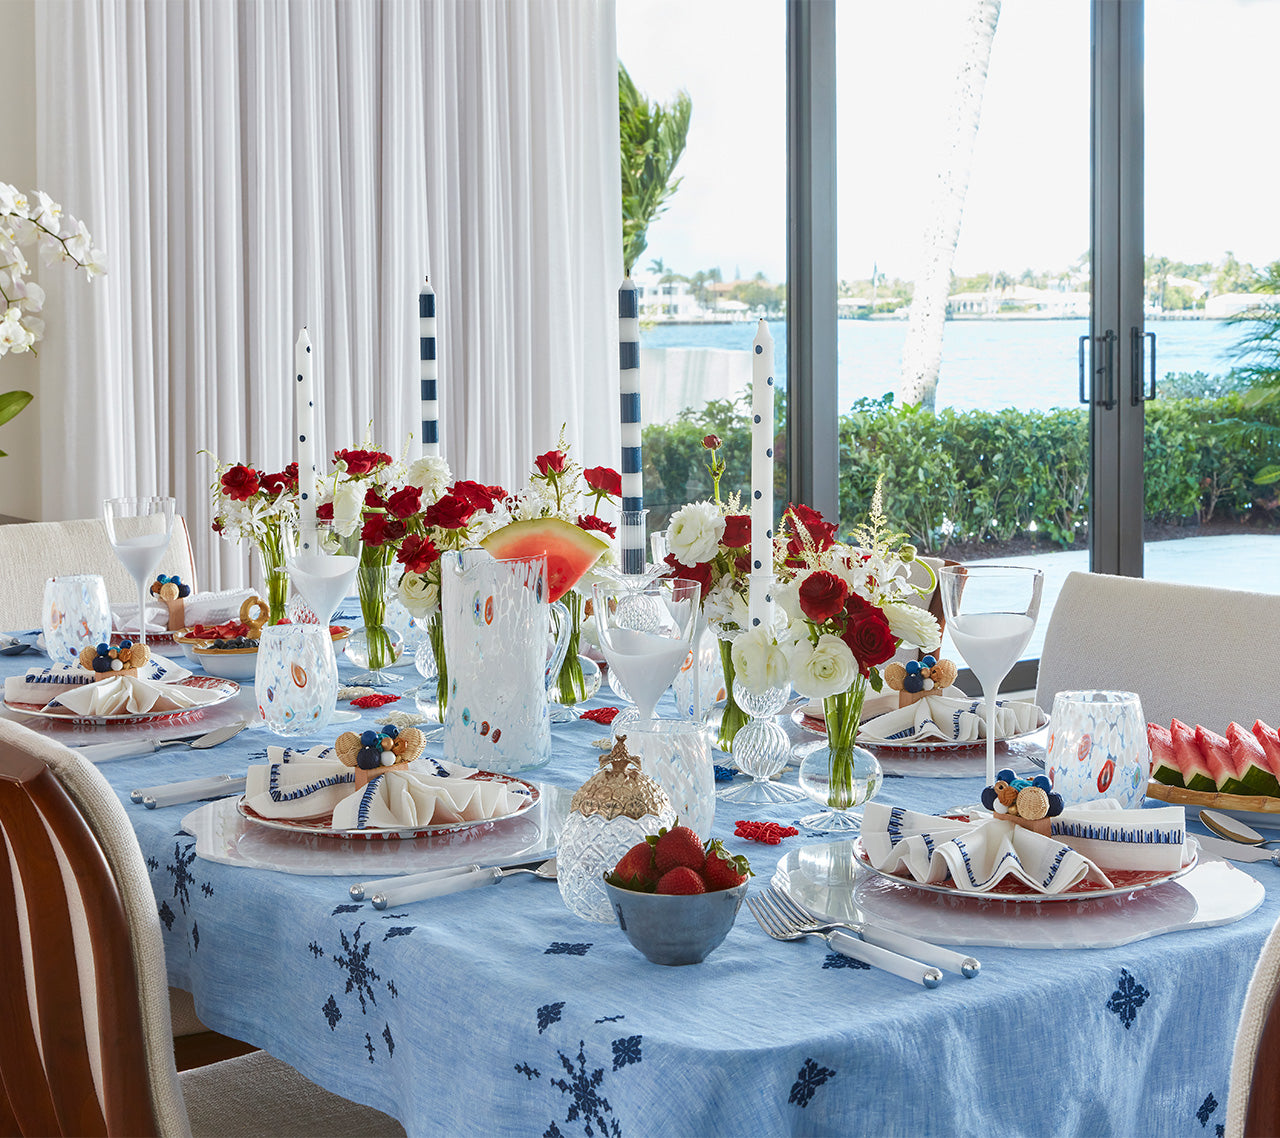 Table set with the Fez Tablecloth in periwinkle and navy and colorful accents like strawberries in blue bowls, watermelon,  and red & white flowers